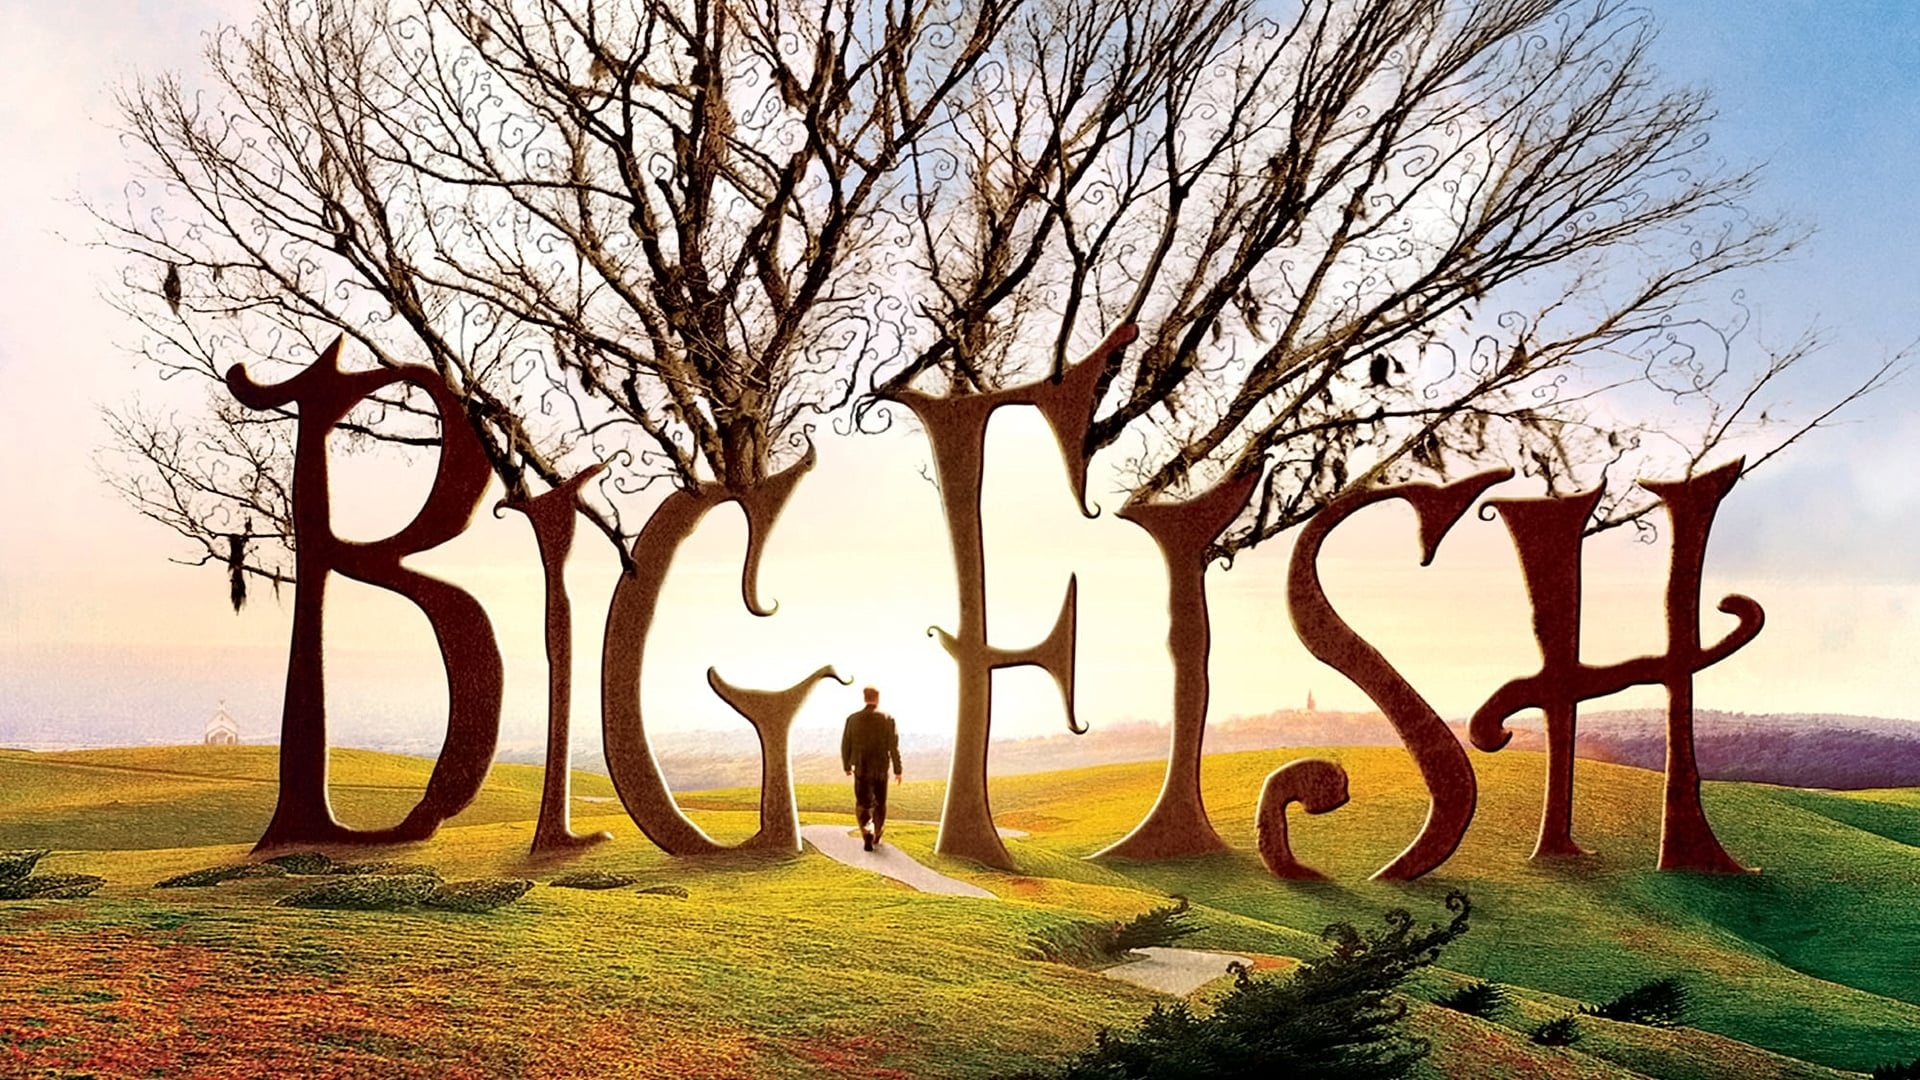 Big Fish (Movie): The film grossed $122.9 million against a $70 million budget. 1920x1080 Full HD Background.